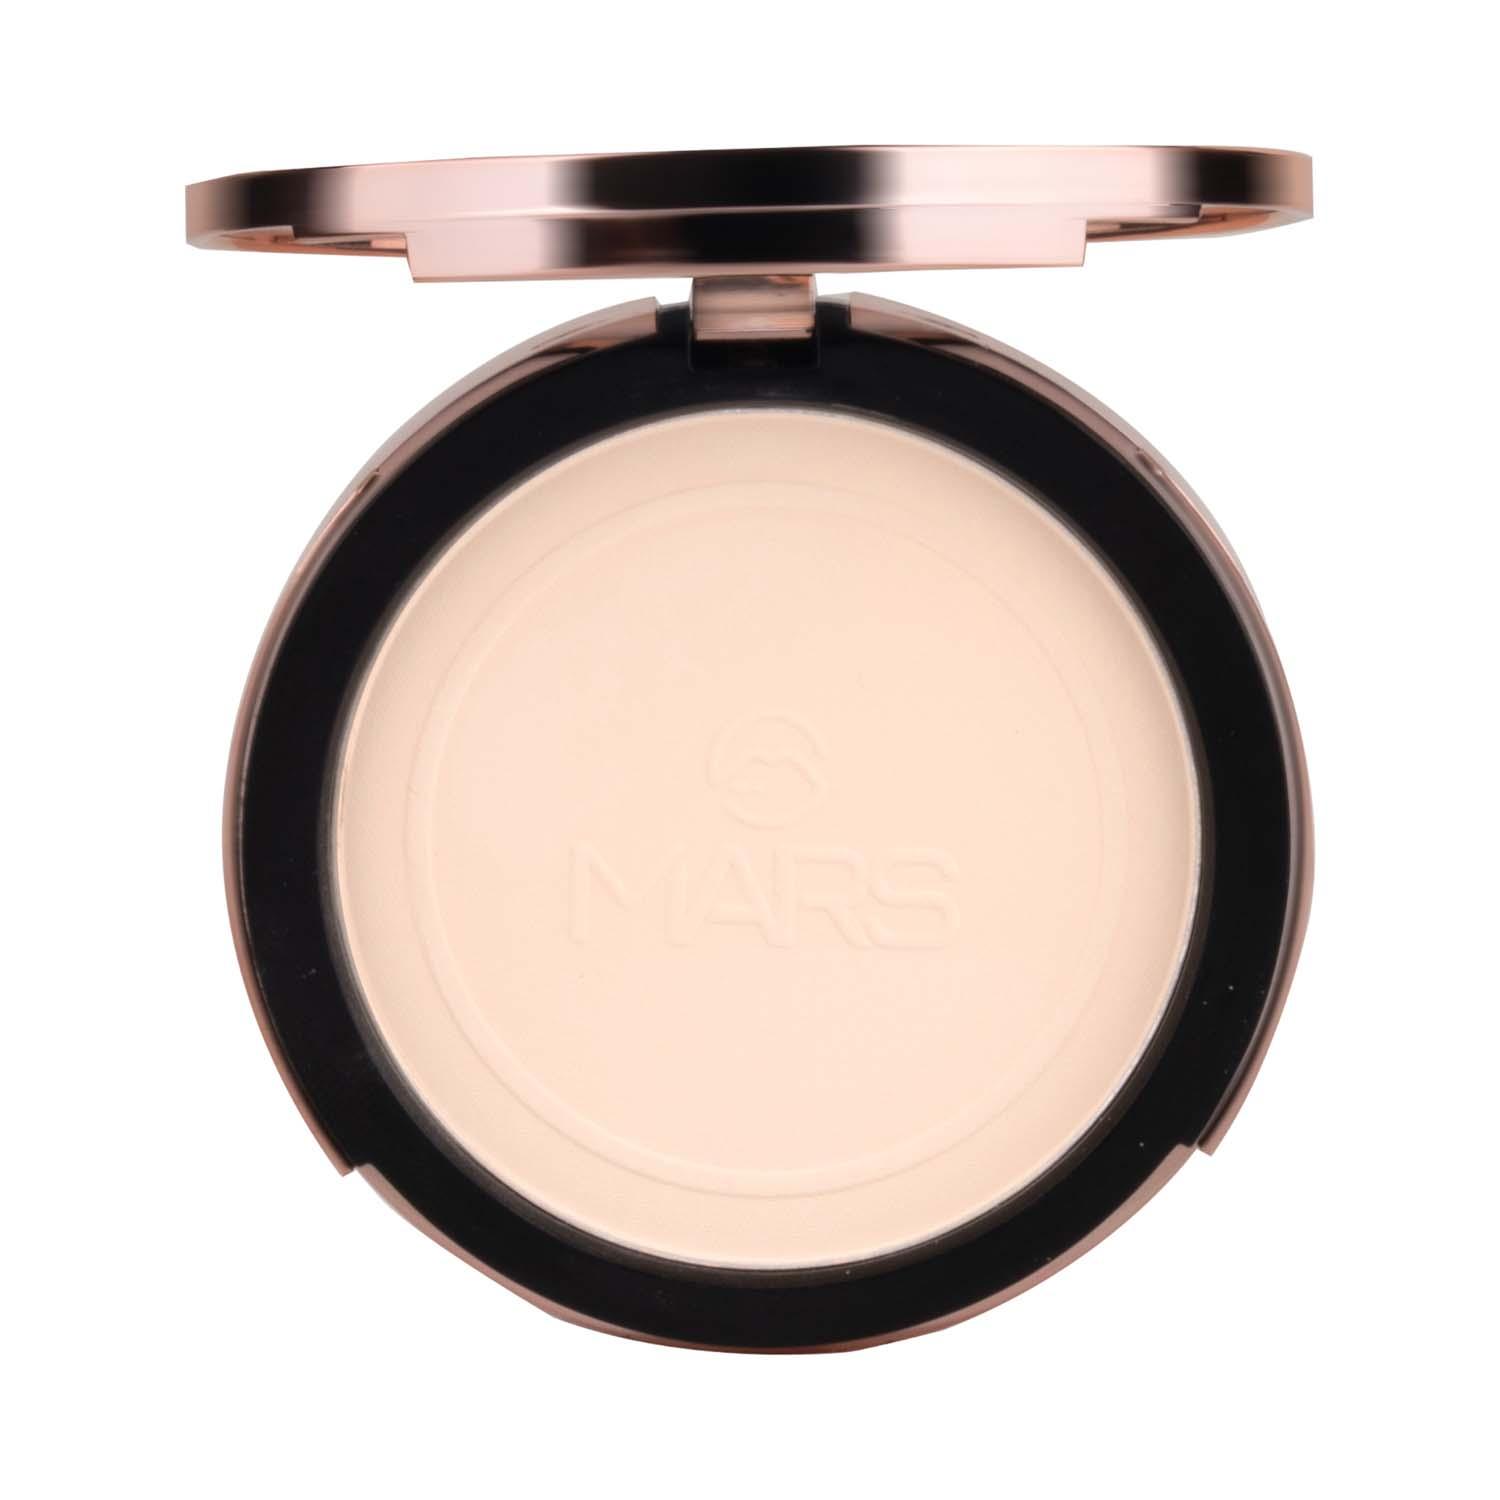 MARS Matte On Compact Powder With Puff Applicator - 02 Beige (8g)